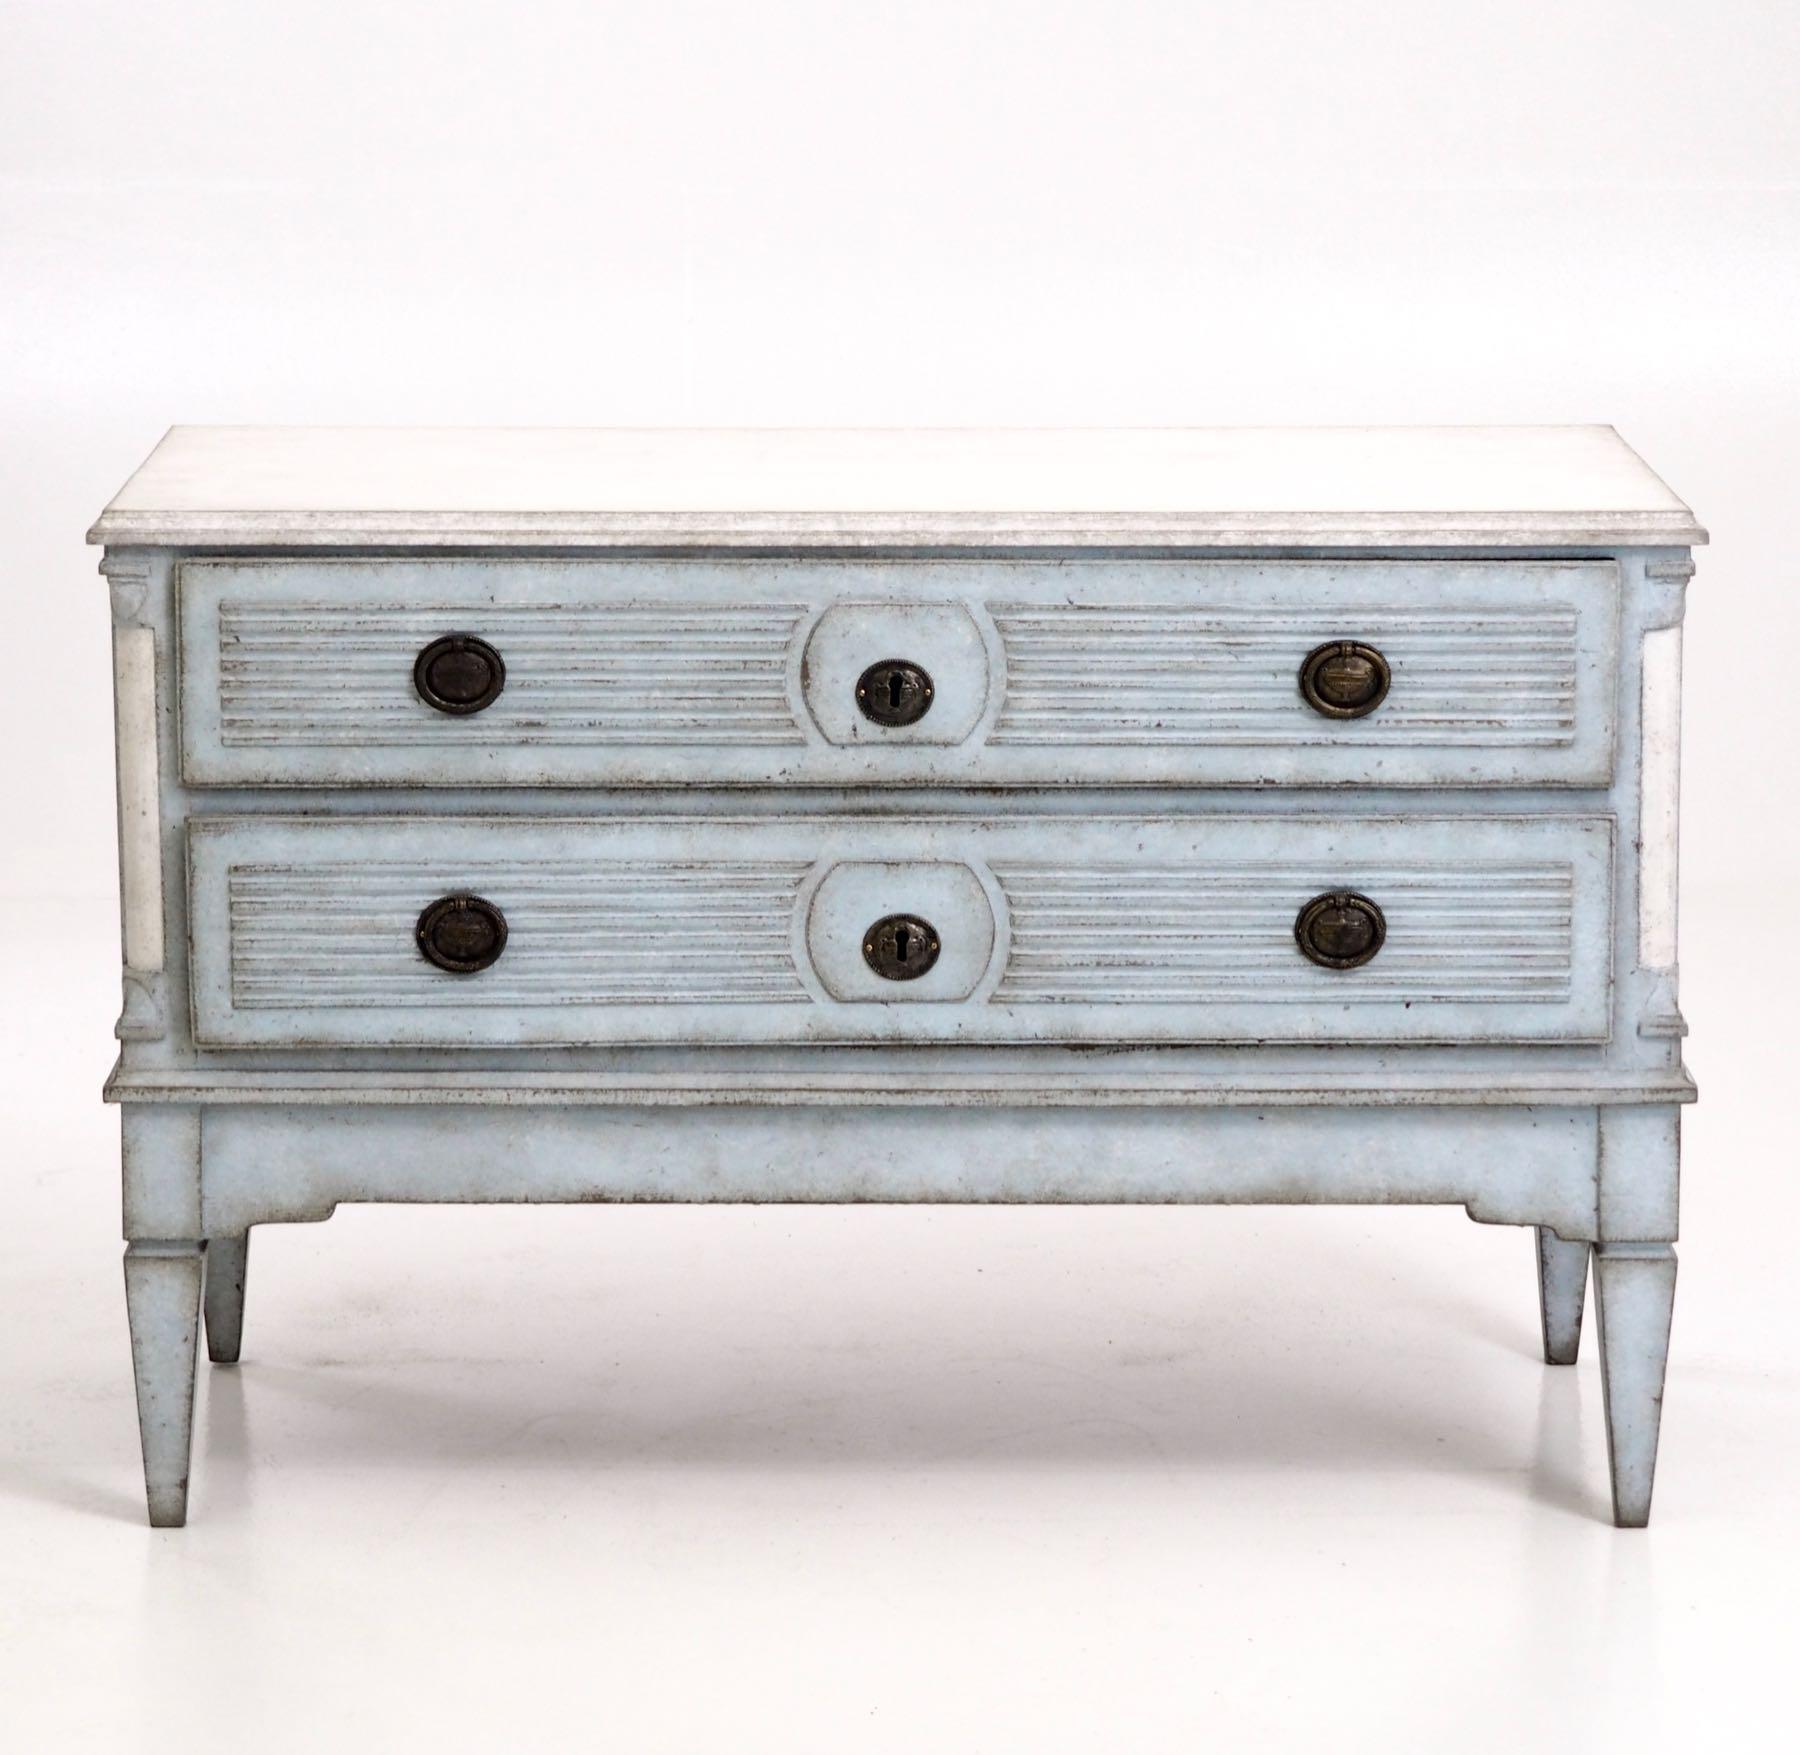 Charming Gustavian chest, richly carved, with top and columns. Restored legs, 18th century.